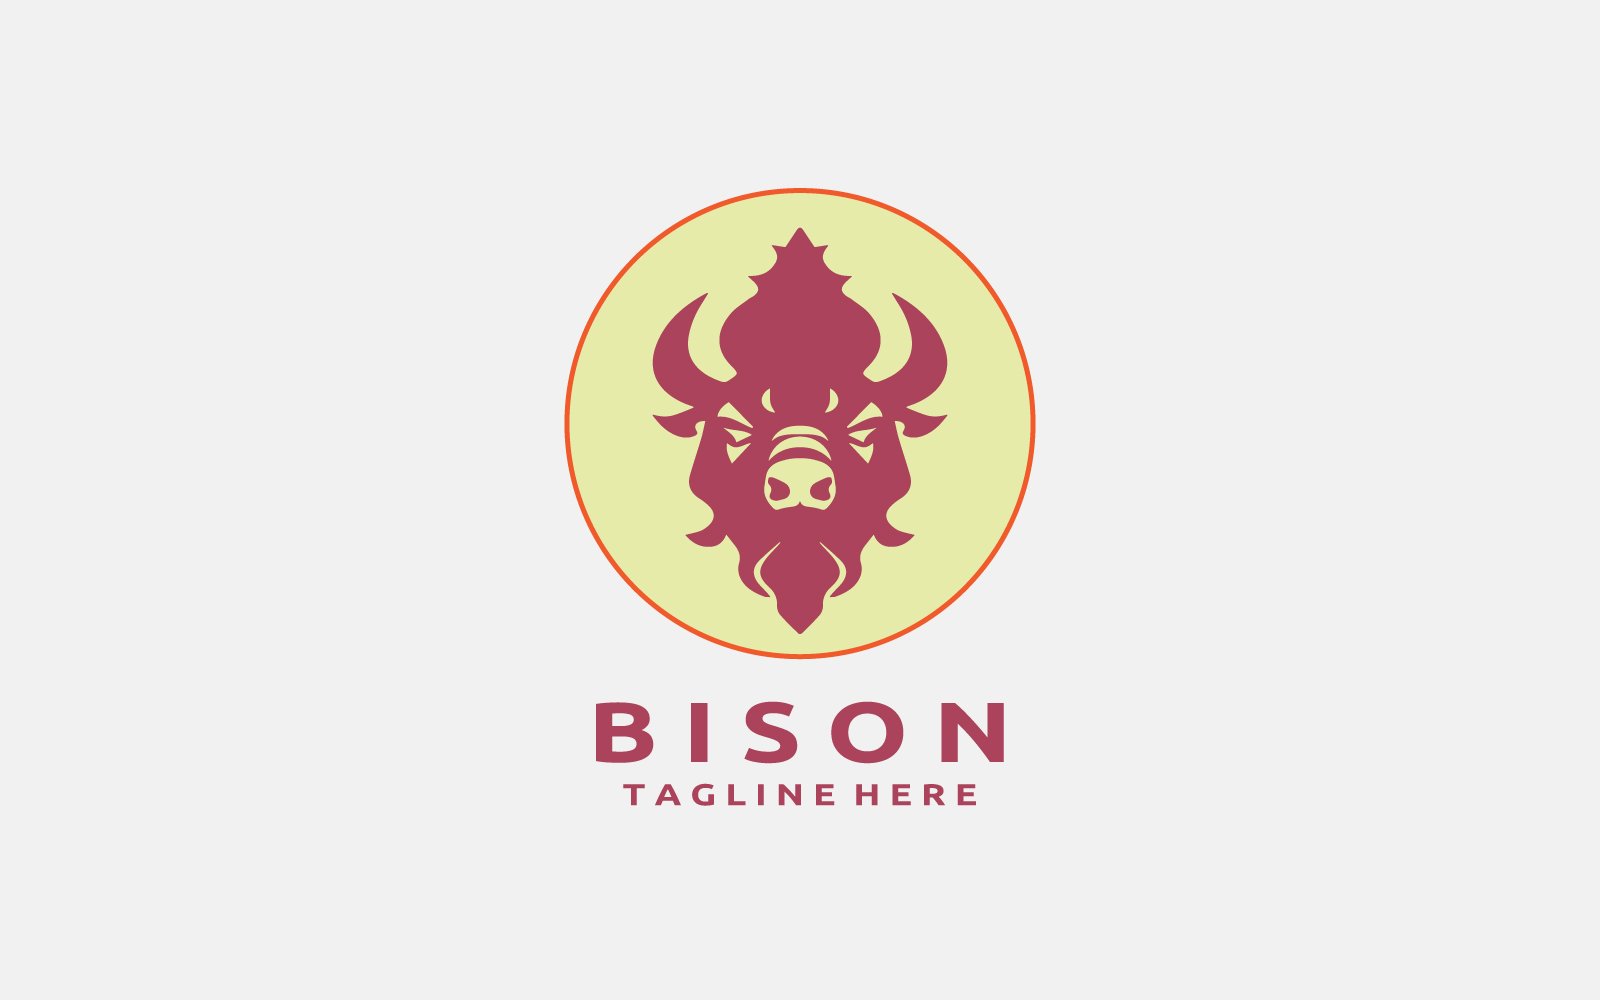 Template #381892 Logo Bison Webdesign Template - Logo template Preview